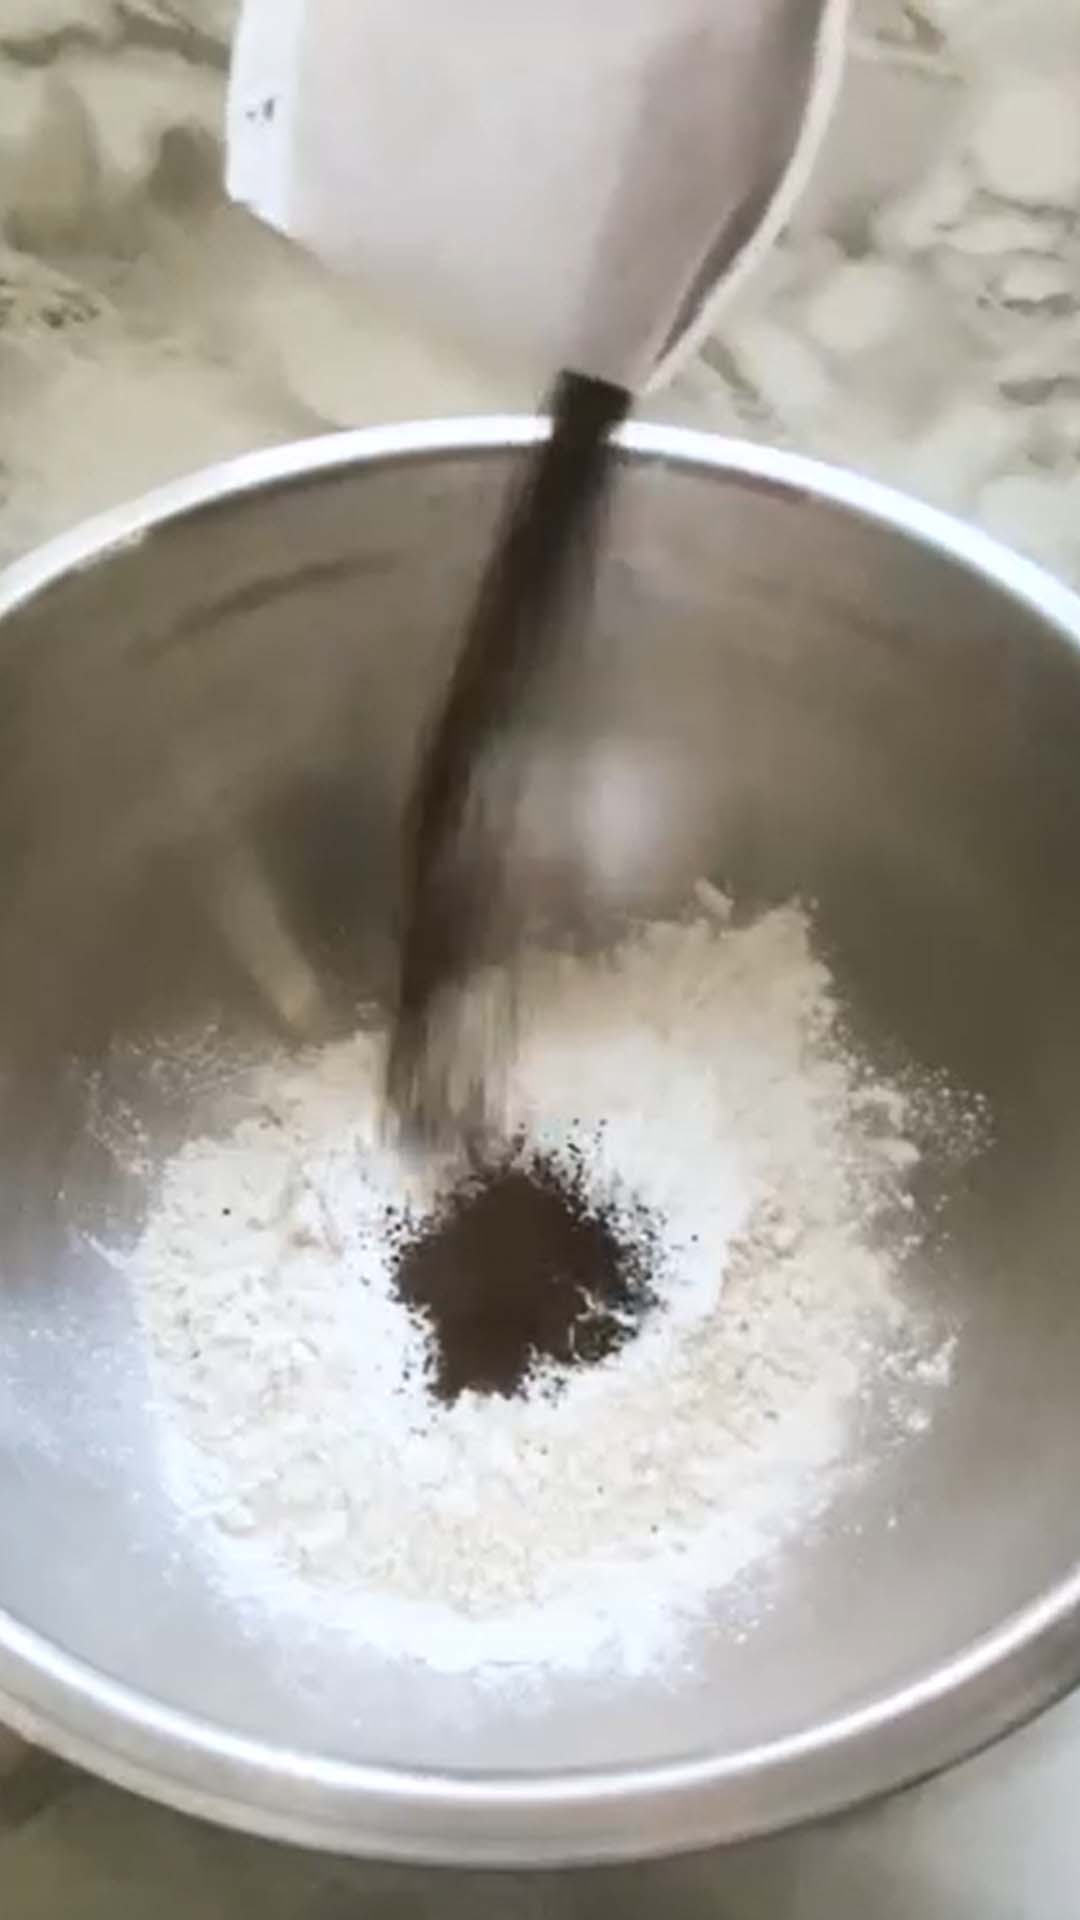 Adding earl grey tea leaves to a bowl of flour.